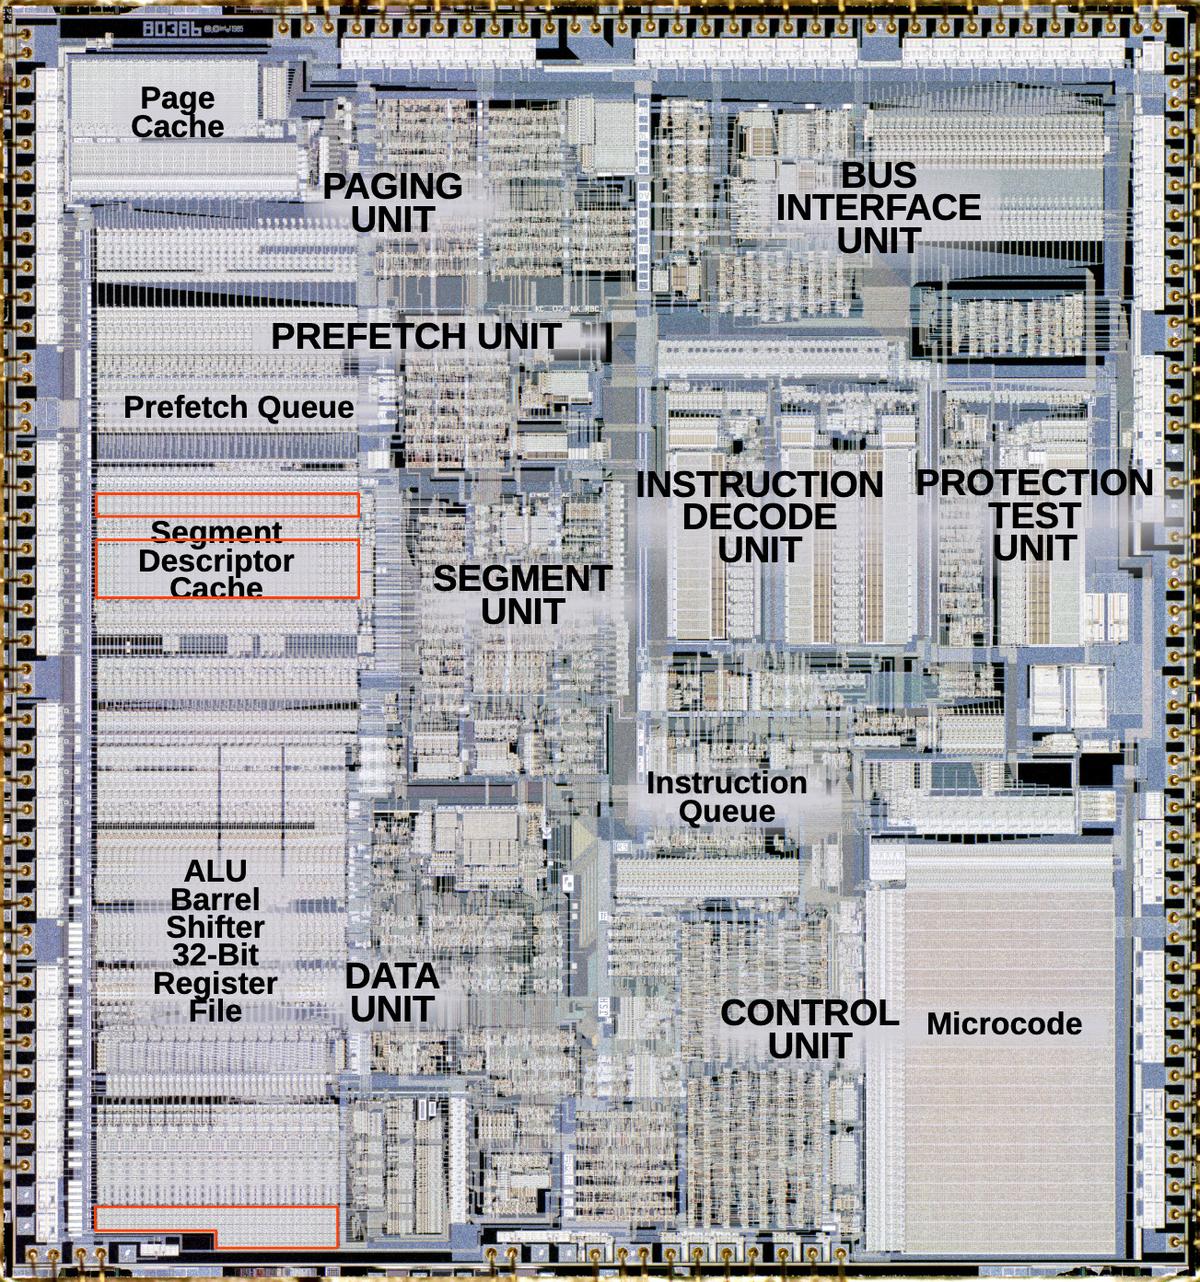 The 386 with the main functional blocks labeled. Click this image (or any other) for a larger version. I created this image using a die photo from Antoine Bercovici.